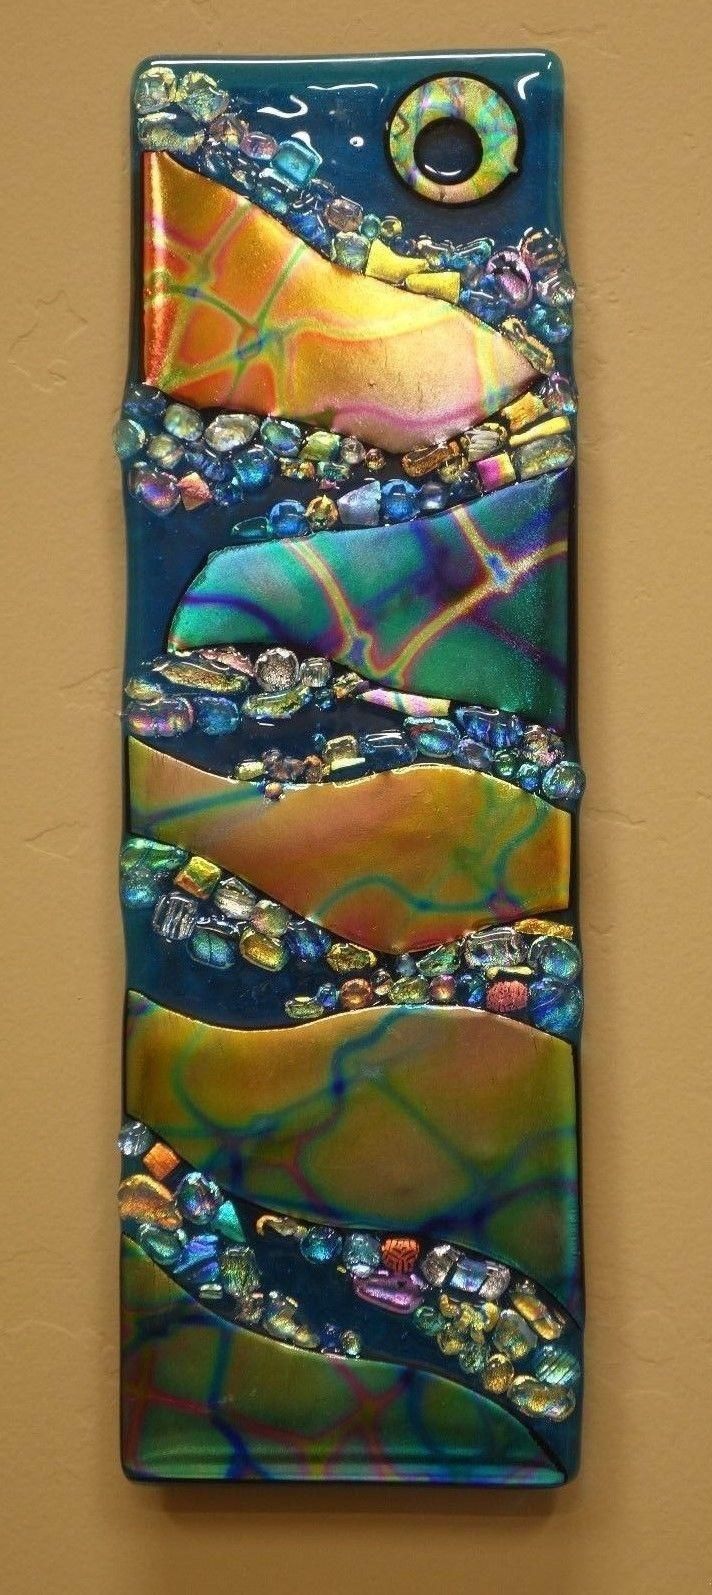 1599 Best Fusing Images On Pinterest | Fused Glass, Glass Art And With Regard To Fused Glass Art For Walls (View 11 of 20)